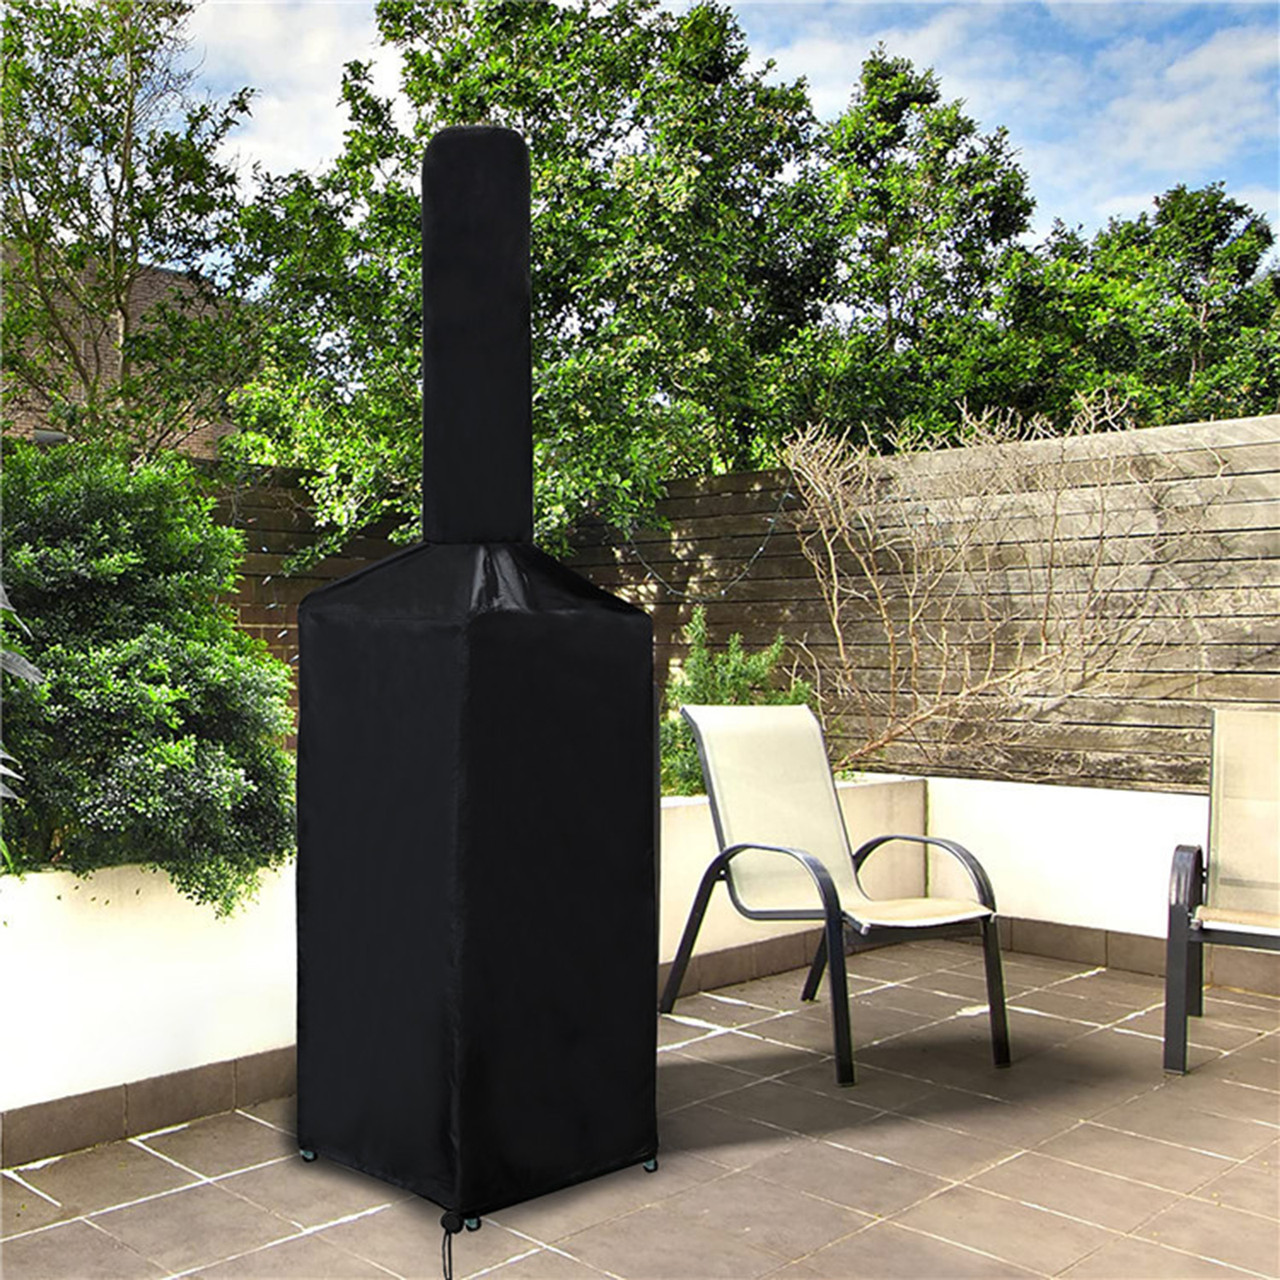 50*37*103*160cm Heavy Duty Outdoor Pizza Oven Cover Bread Oven BBQ Waterproof Dust Protection